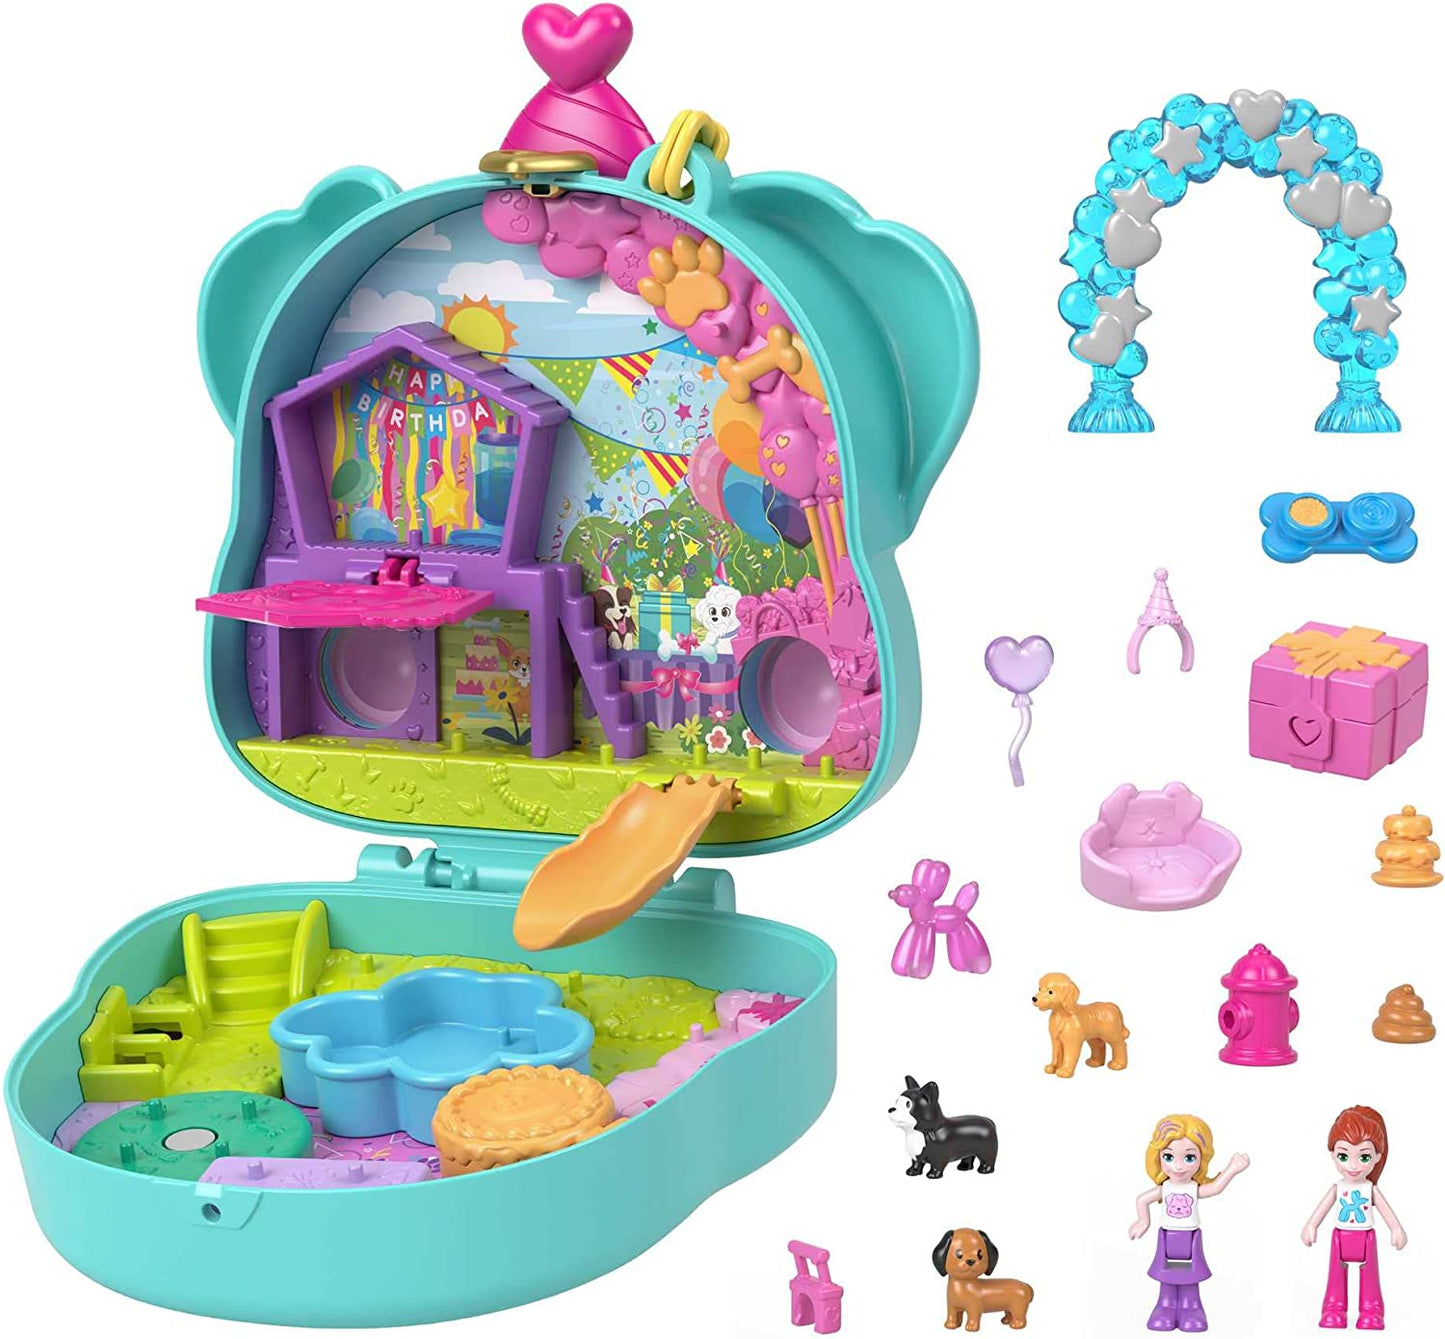 Polly Pocket Mini Toys, Doggy Birthday Bash Compact Playset with 2 Micro Dolls and 14 Accessories, Pocket World Travel Toys with Surprise Reveals